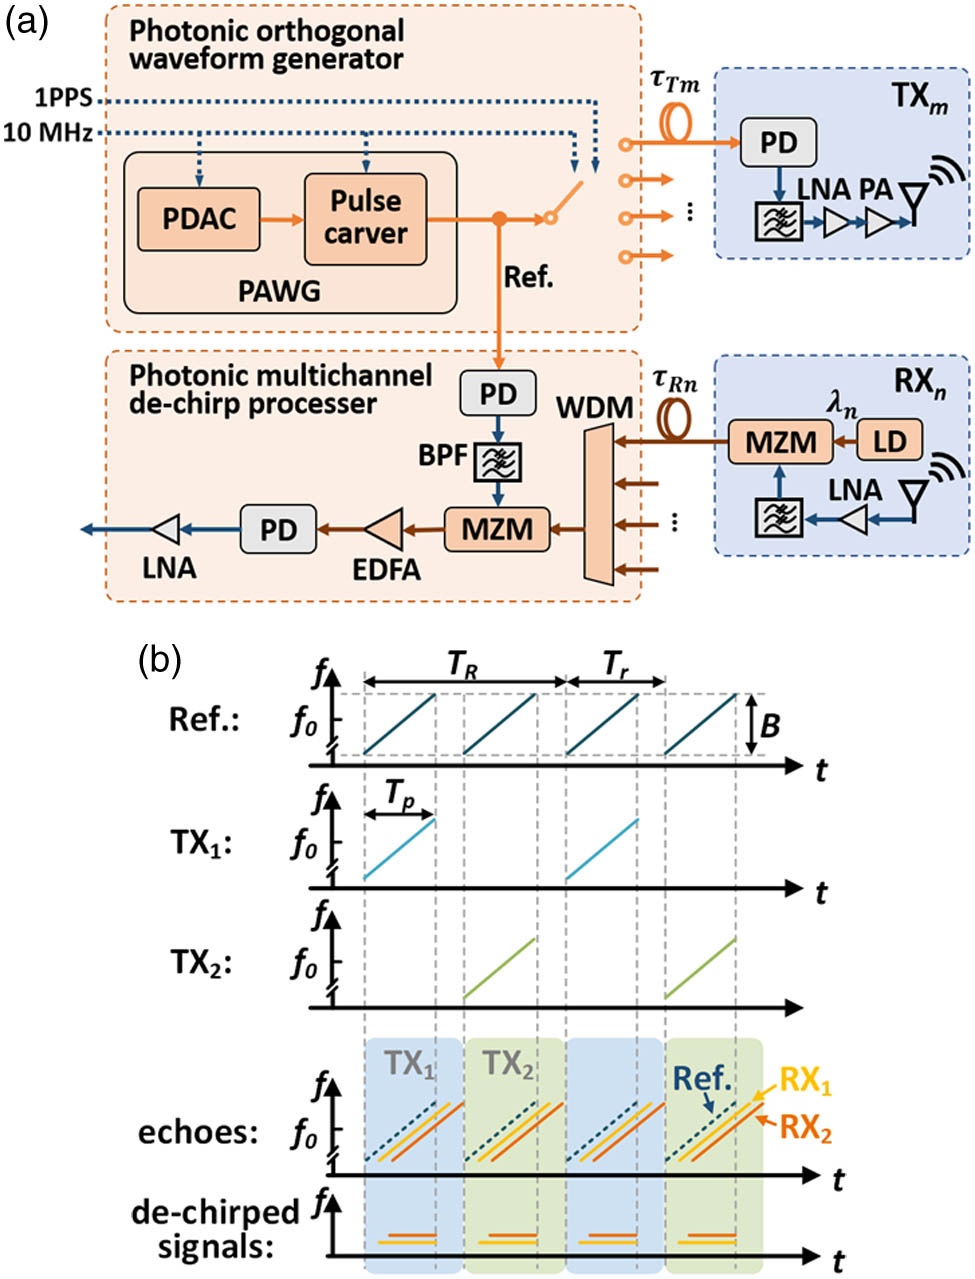 (a) Schematic diagram of the proposed photonics-enabled distributed MIMO radar. (b) Instantaneous frequency–time diagram of the reference signal, echoes, and de-chirped signals, in the case of a 2×2 array. LNA, low-noise amplifier; PA, power amplifier; LD, laser diode; WDM, wavelength-division multiplexer; f0, B, and Tp, center frequency, bandwidth, and pulse width of the reference signal, respectively; Tr and TR, pulse repetition periods of the reference signal and emission signal, respectively.